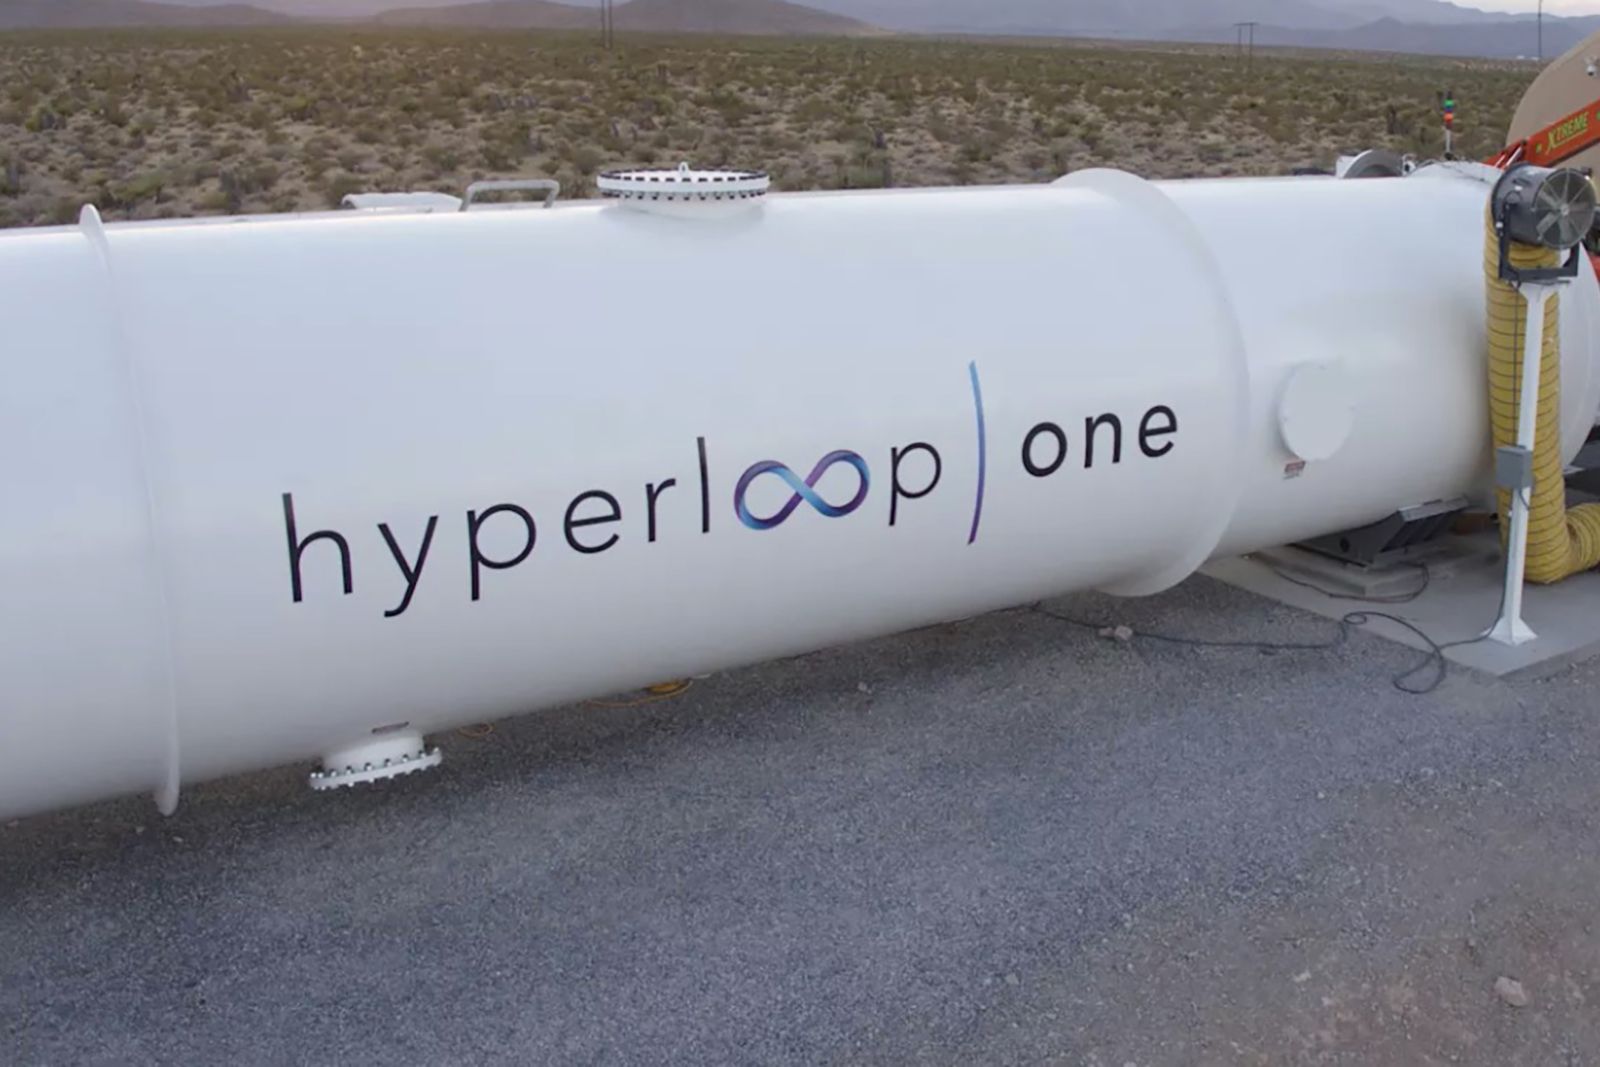 What Is Hyperloop The 700mph Subsonic Train Explained image 9